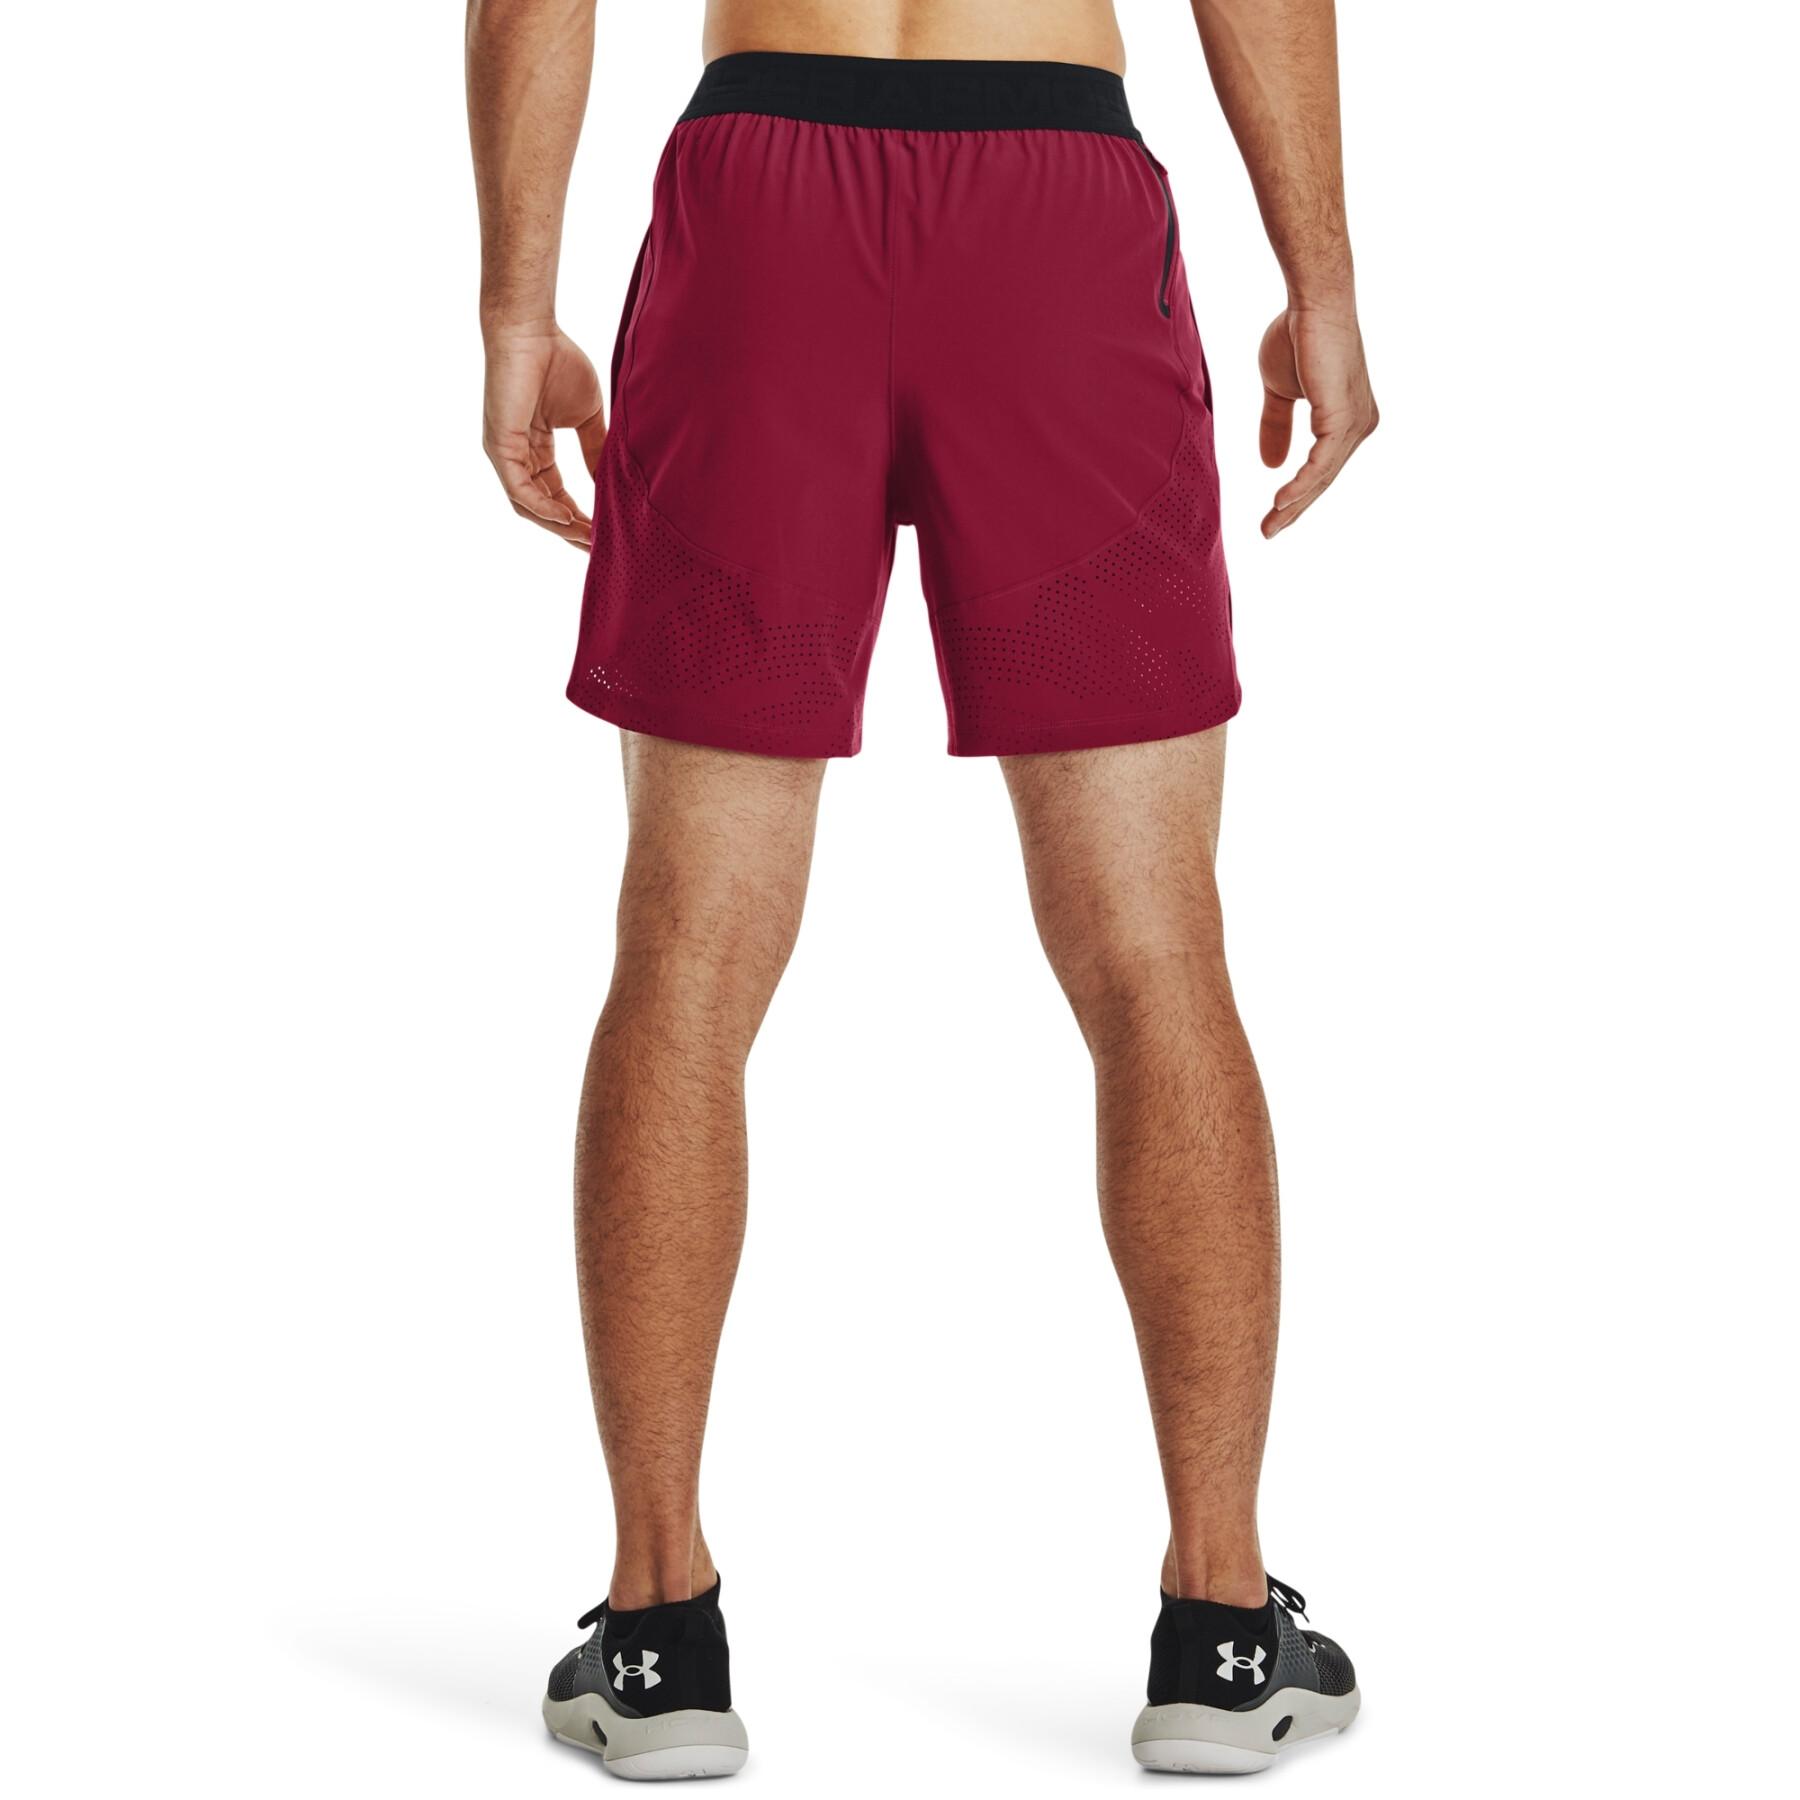 Woven shorts Under Armour Stretch